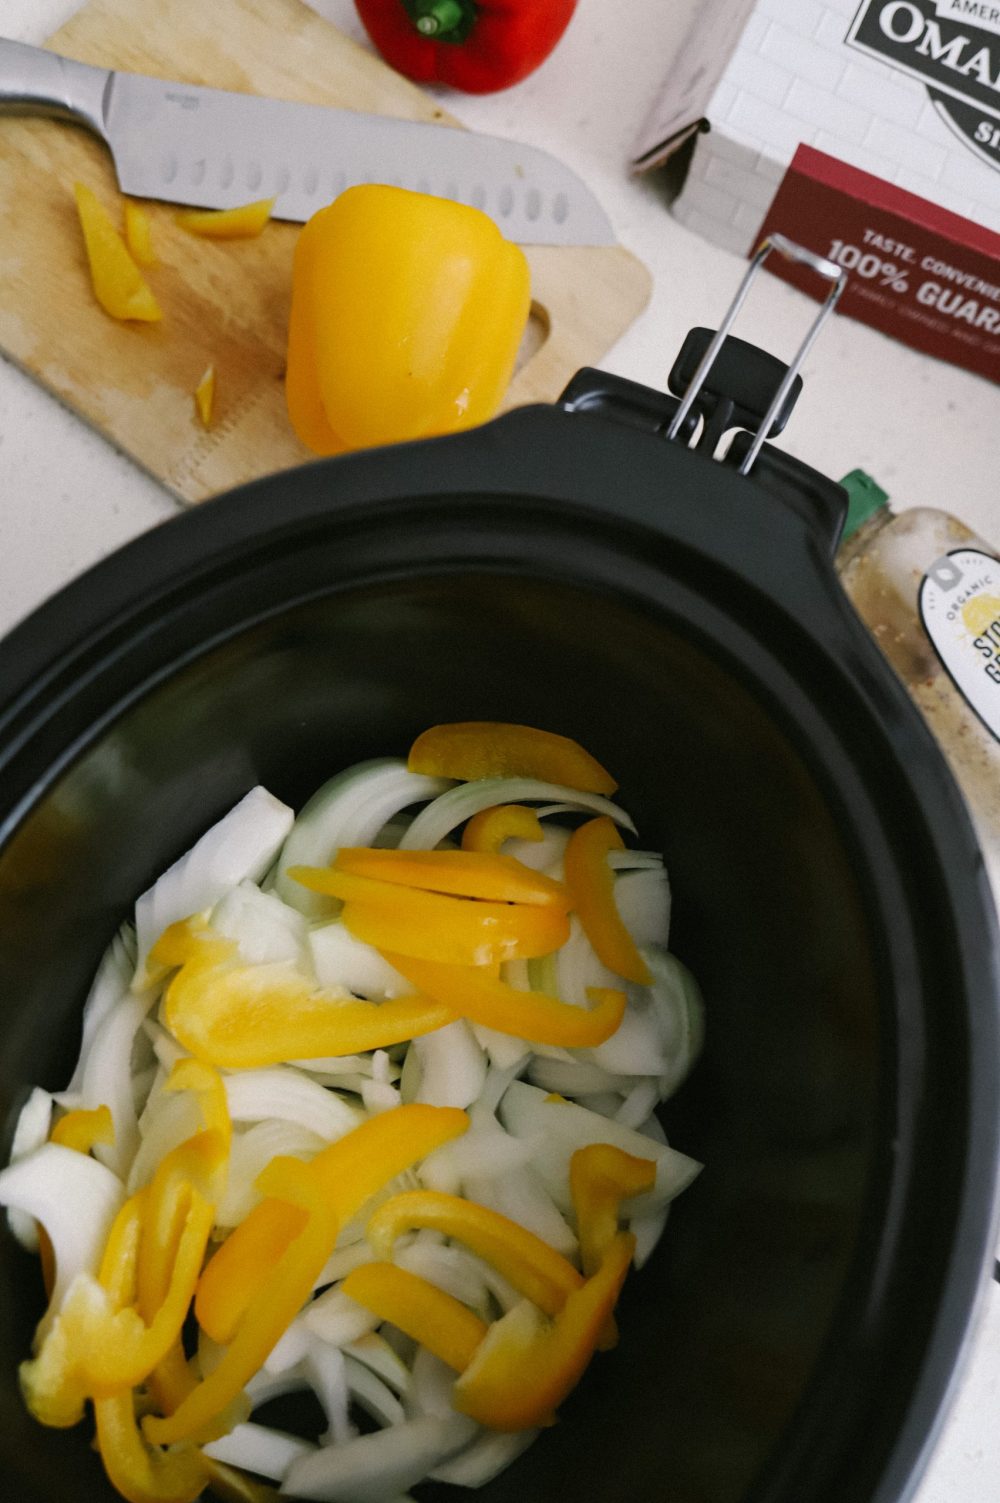 Crockpot Recipes for Large Families: How to Make Slow Cooker Beer Brats with Peppers and Onions